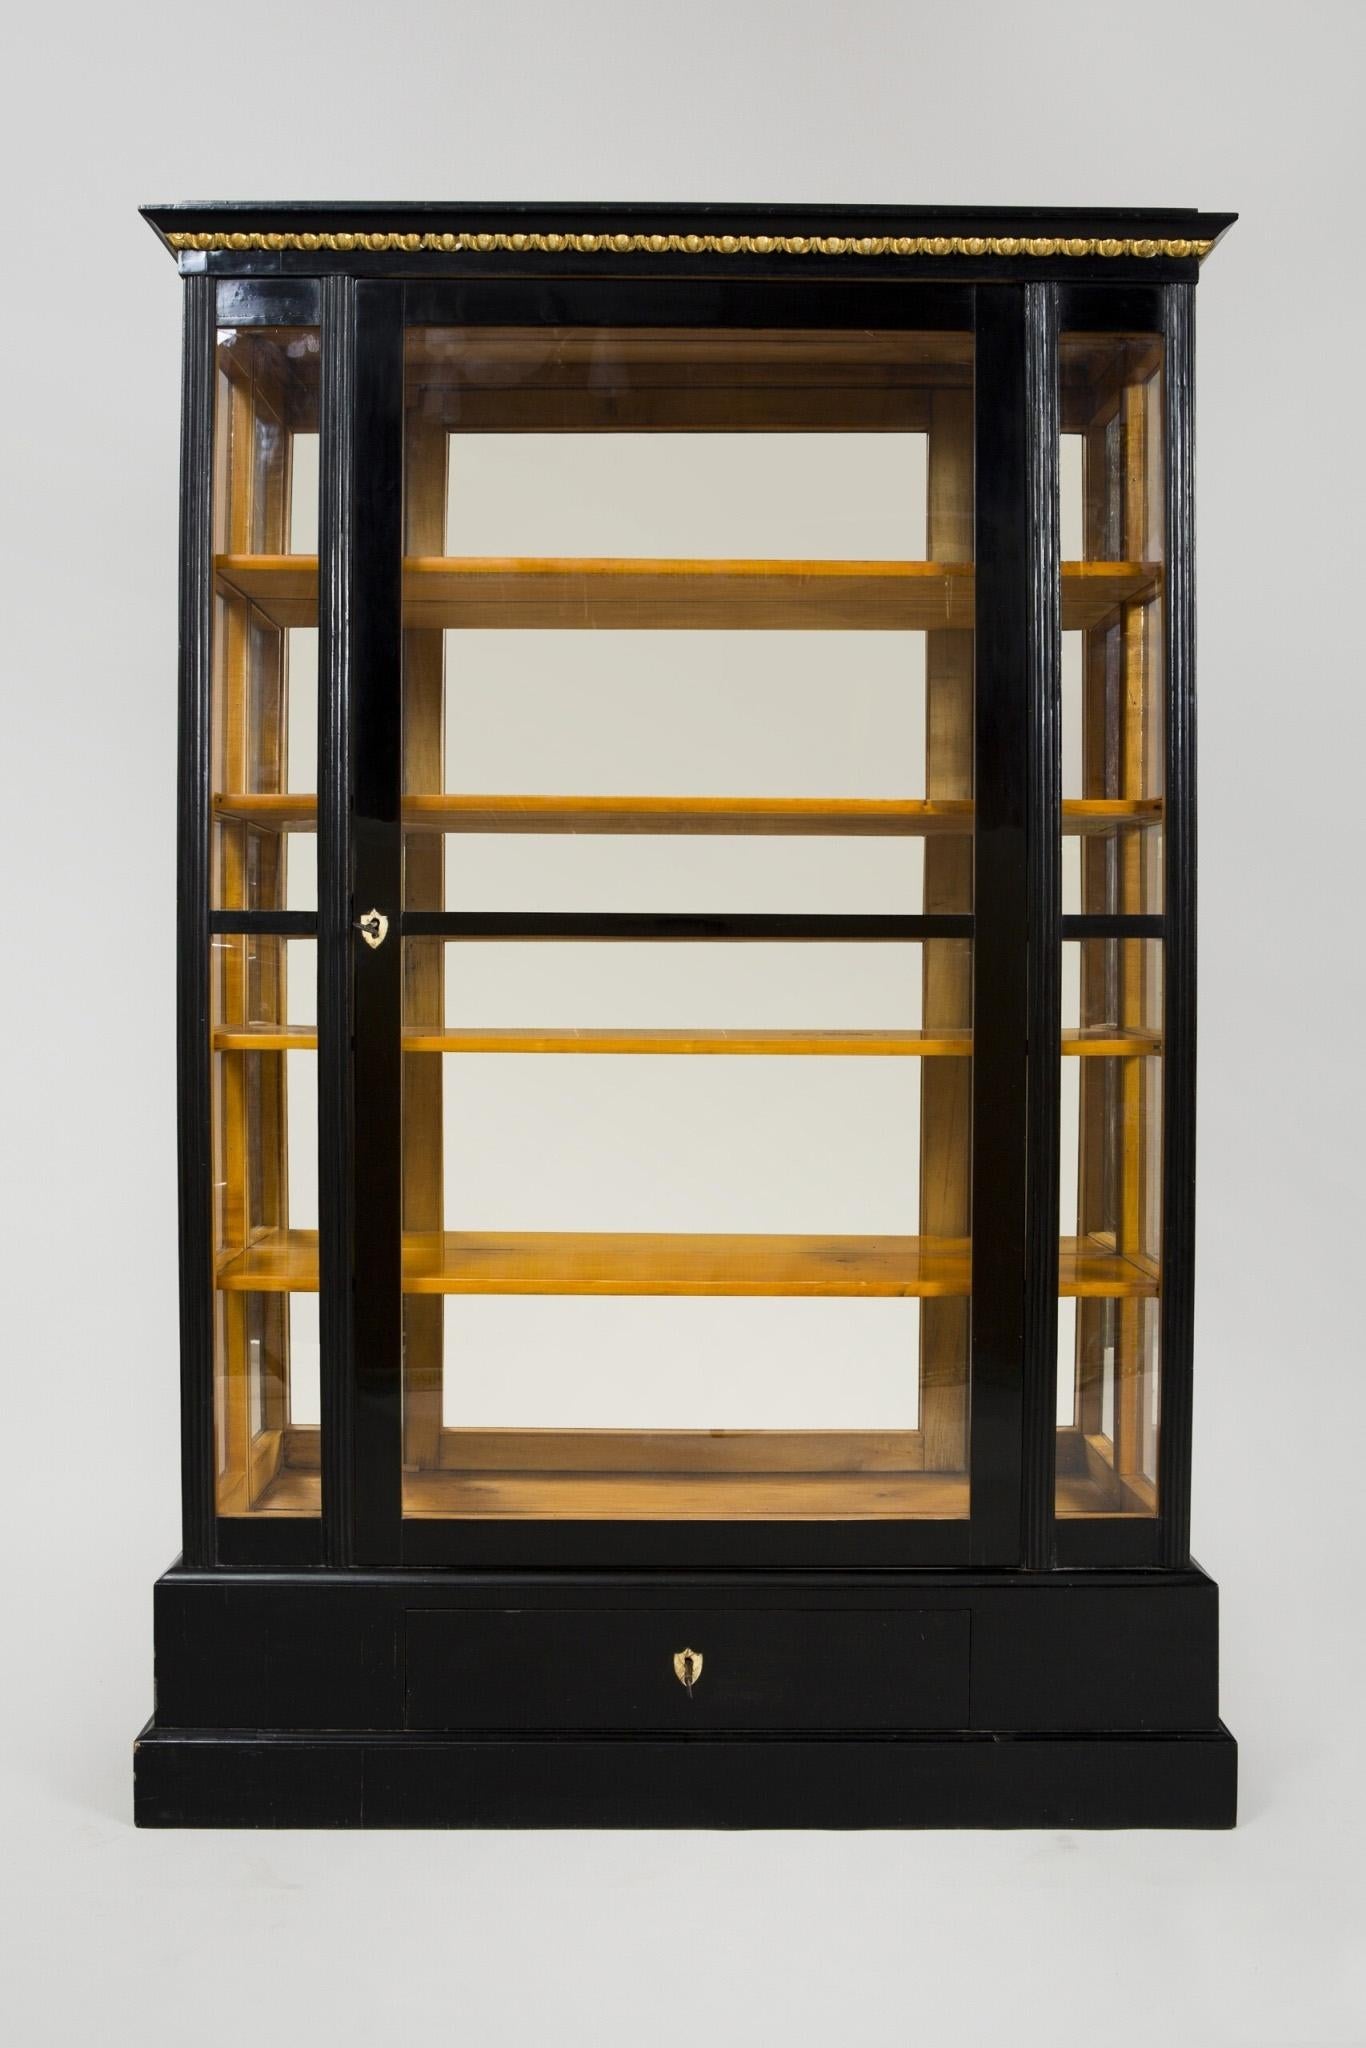 19th century Empire display cabinet from Austria
Completely restored, surface made by shellac polish.
   